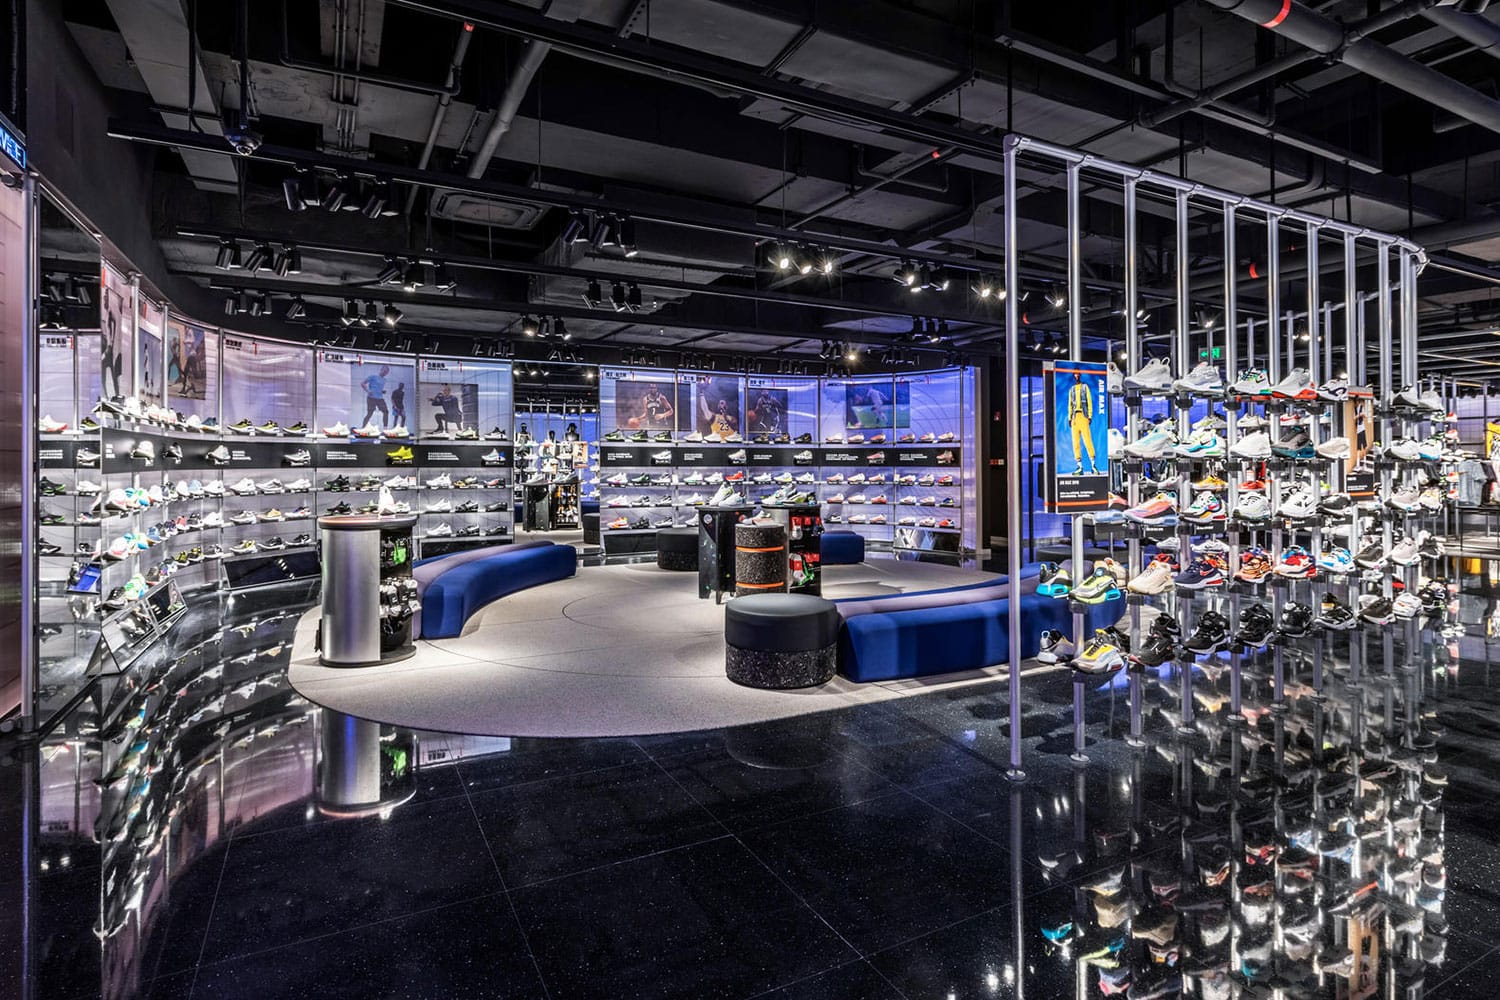 concept store nike